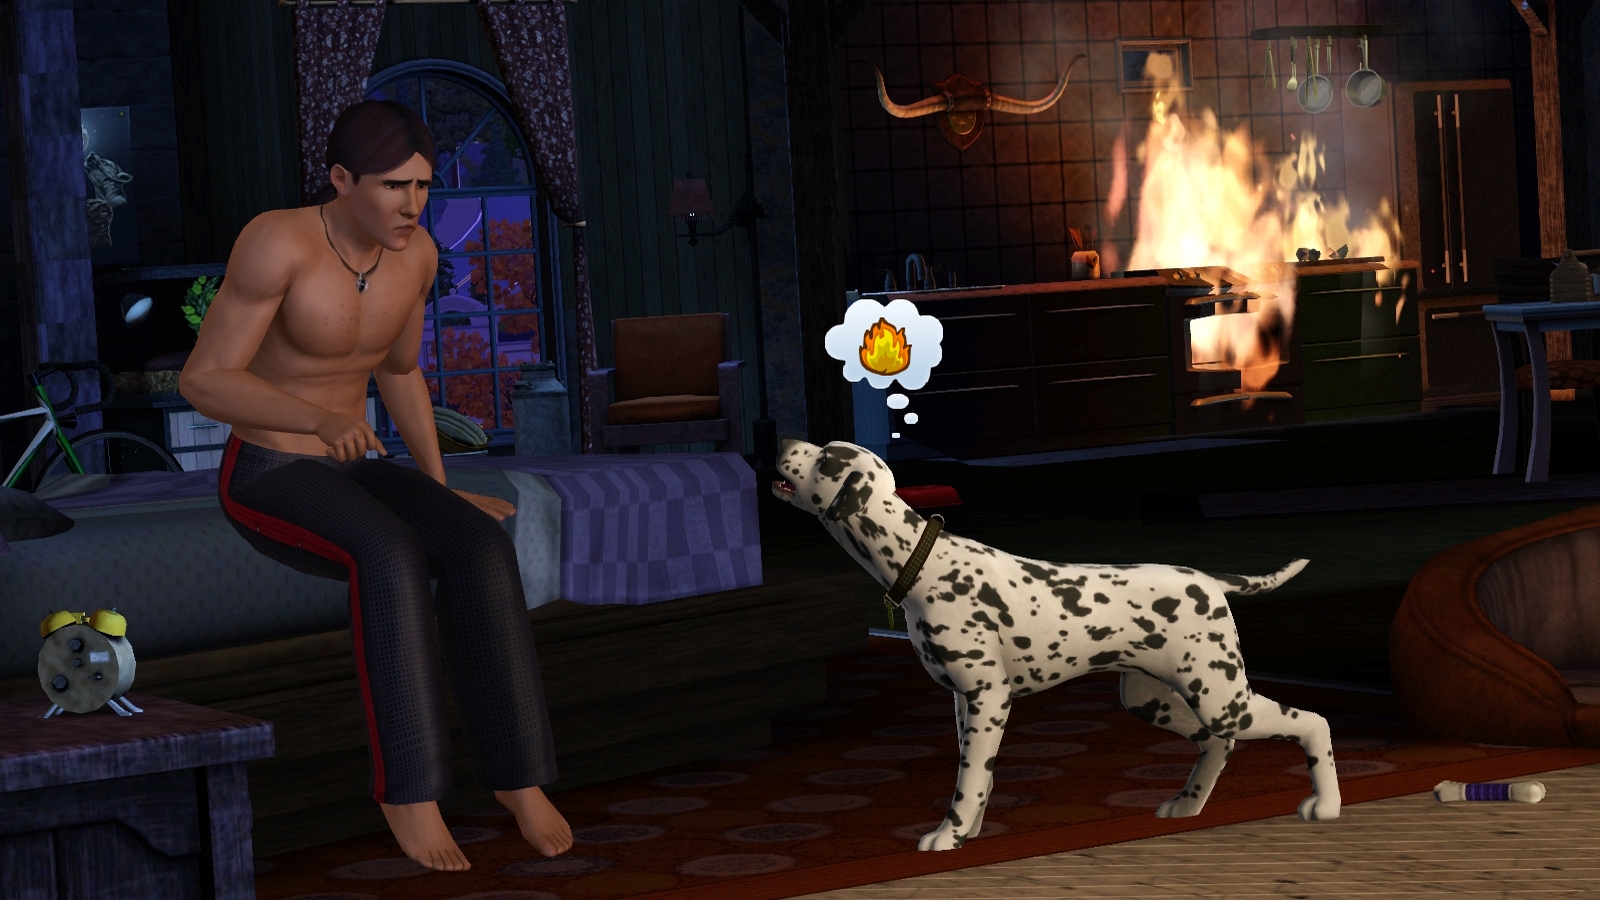 The Sims 3 Pets Hands-On Impression